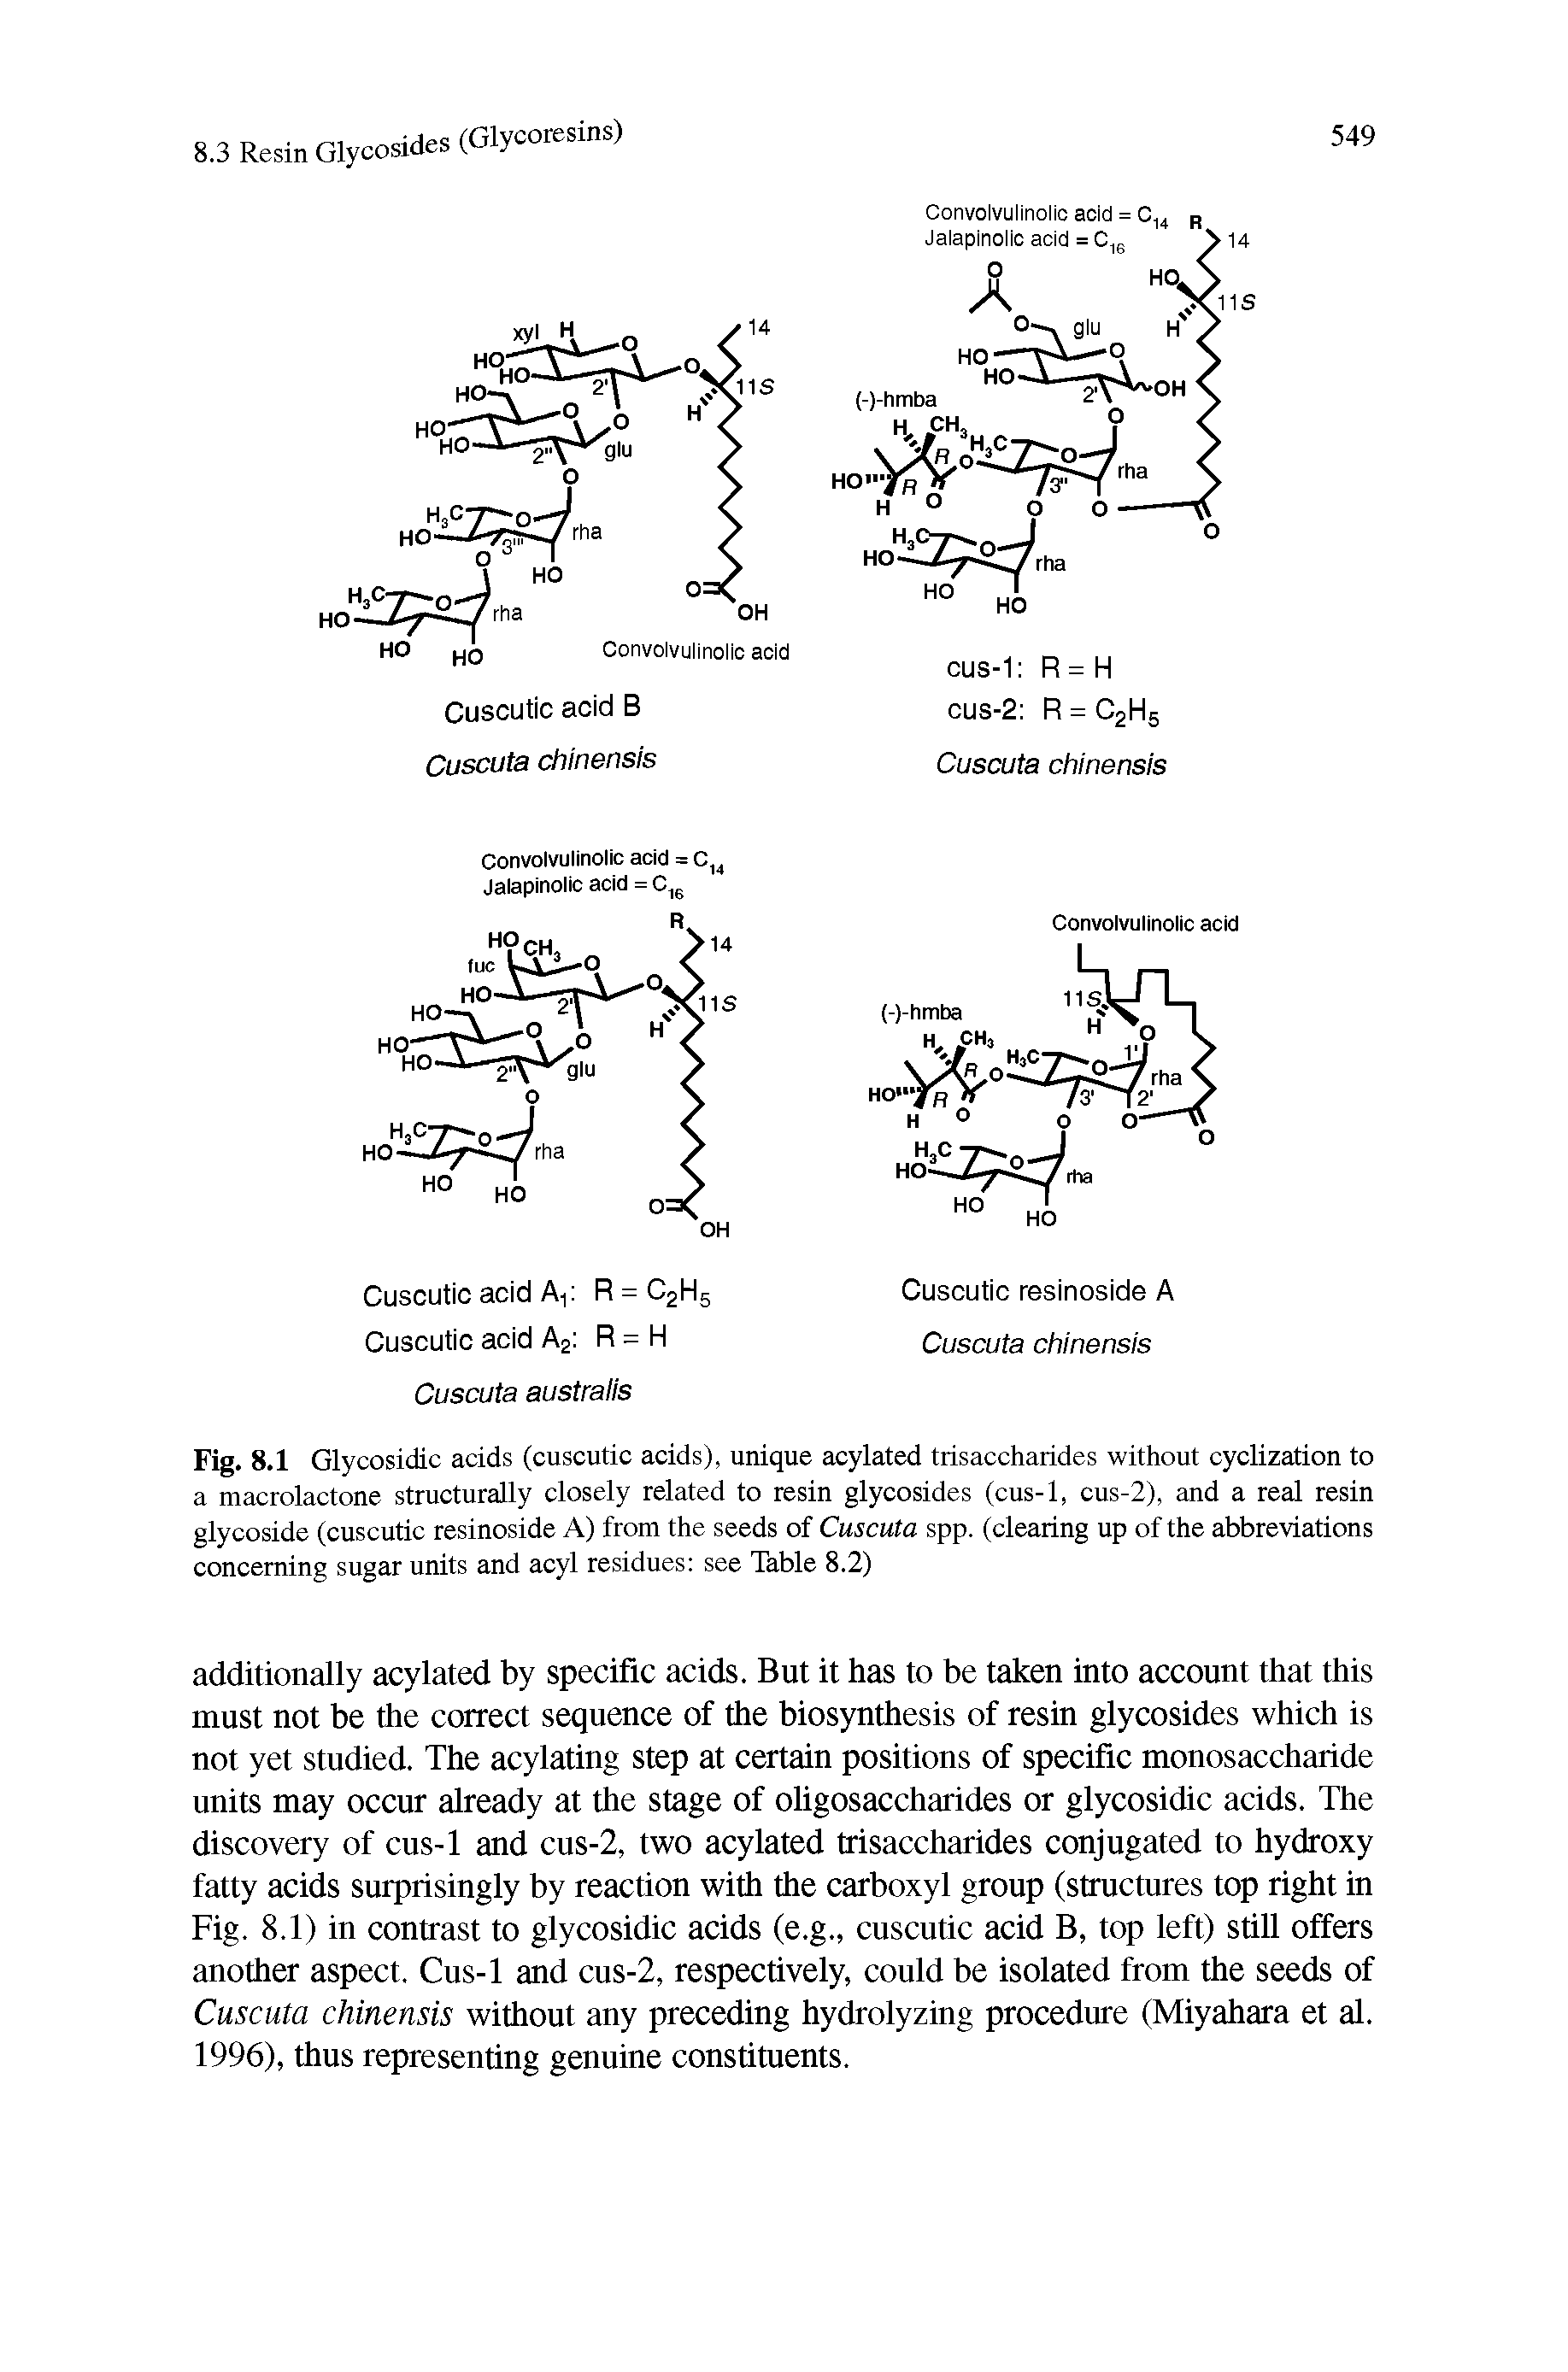 Fig. 8.1 Glycosidic acids (cuscutic acids), unique acylated trisaccharides without cyclization to a macrolactone structurally closely related to resin glycosides (cus-1, cus-2), and a real resin glycoside (cuscutic resinoside A) from the seeds of Cuscuta spp. (clearing up of the abbreviations concerning sugar units and acyl residues see Table 8.2)...